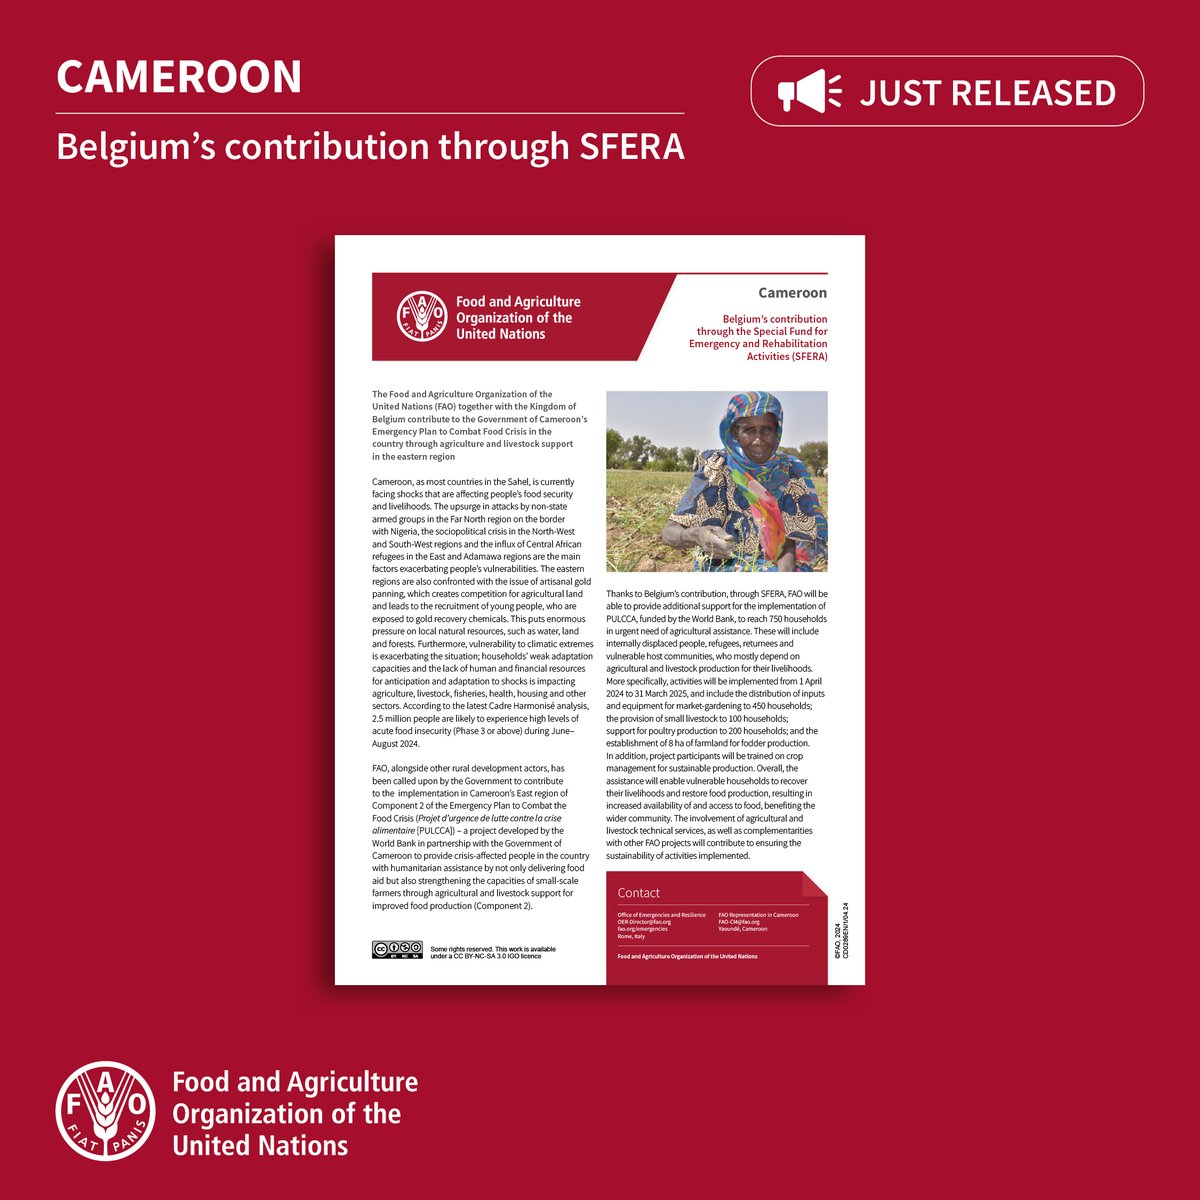 Cameroon, as most countries in the Sahel, is currently facing shocks that are affecting people’s food security & livelihoods. Thanks to @BelgiumMFA funding, @FAO will provide time-critical agricultural inputs to 750 households in need of urgent support. bit.ly/4aw0AOb